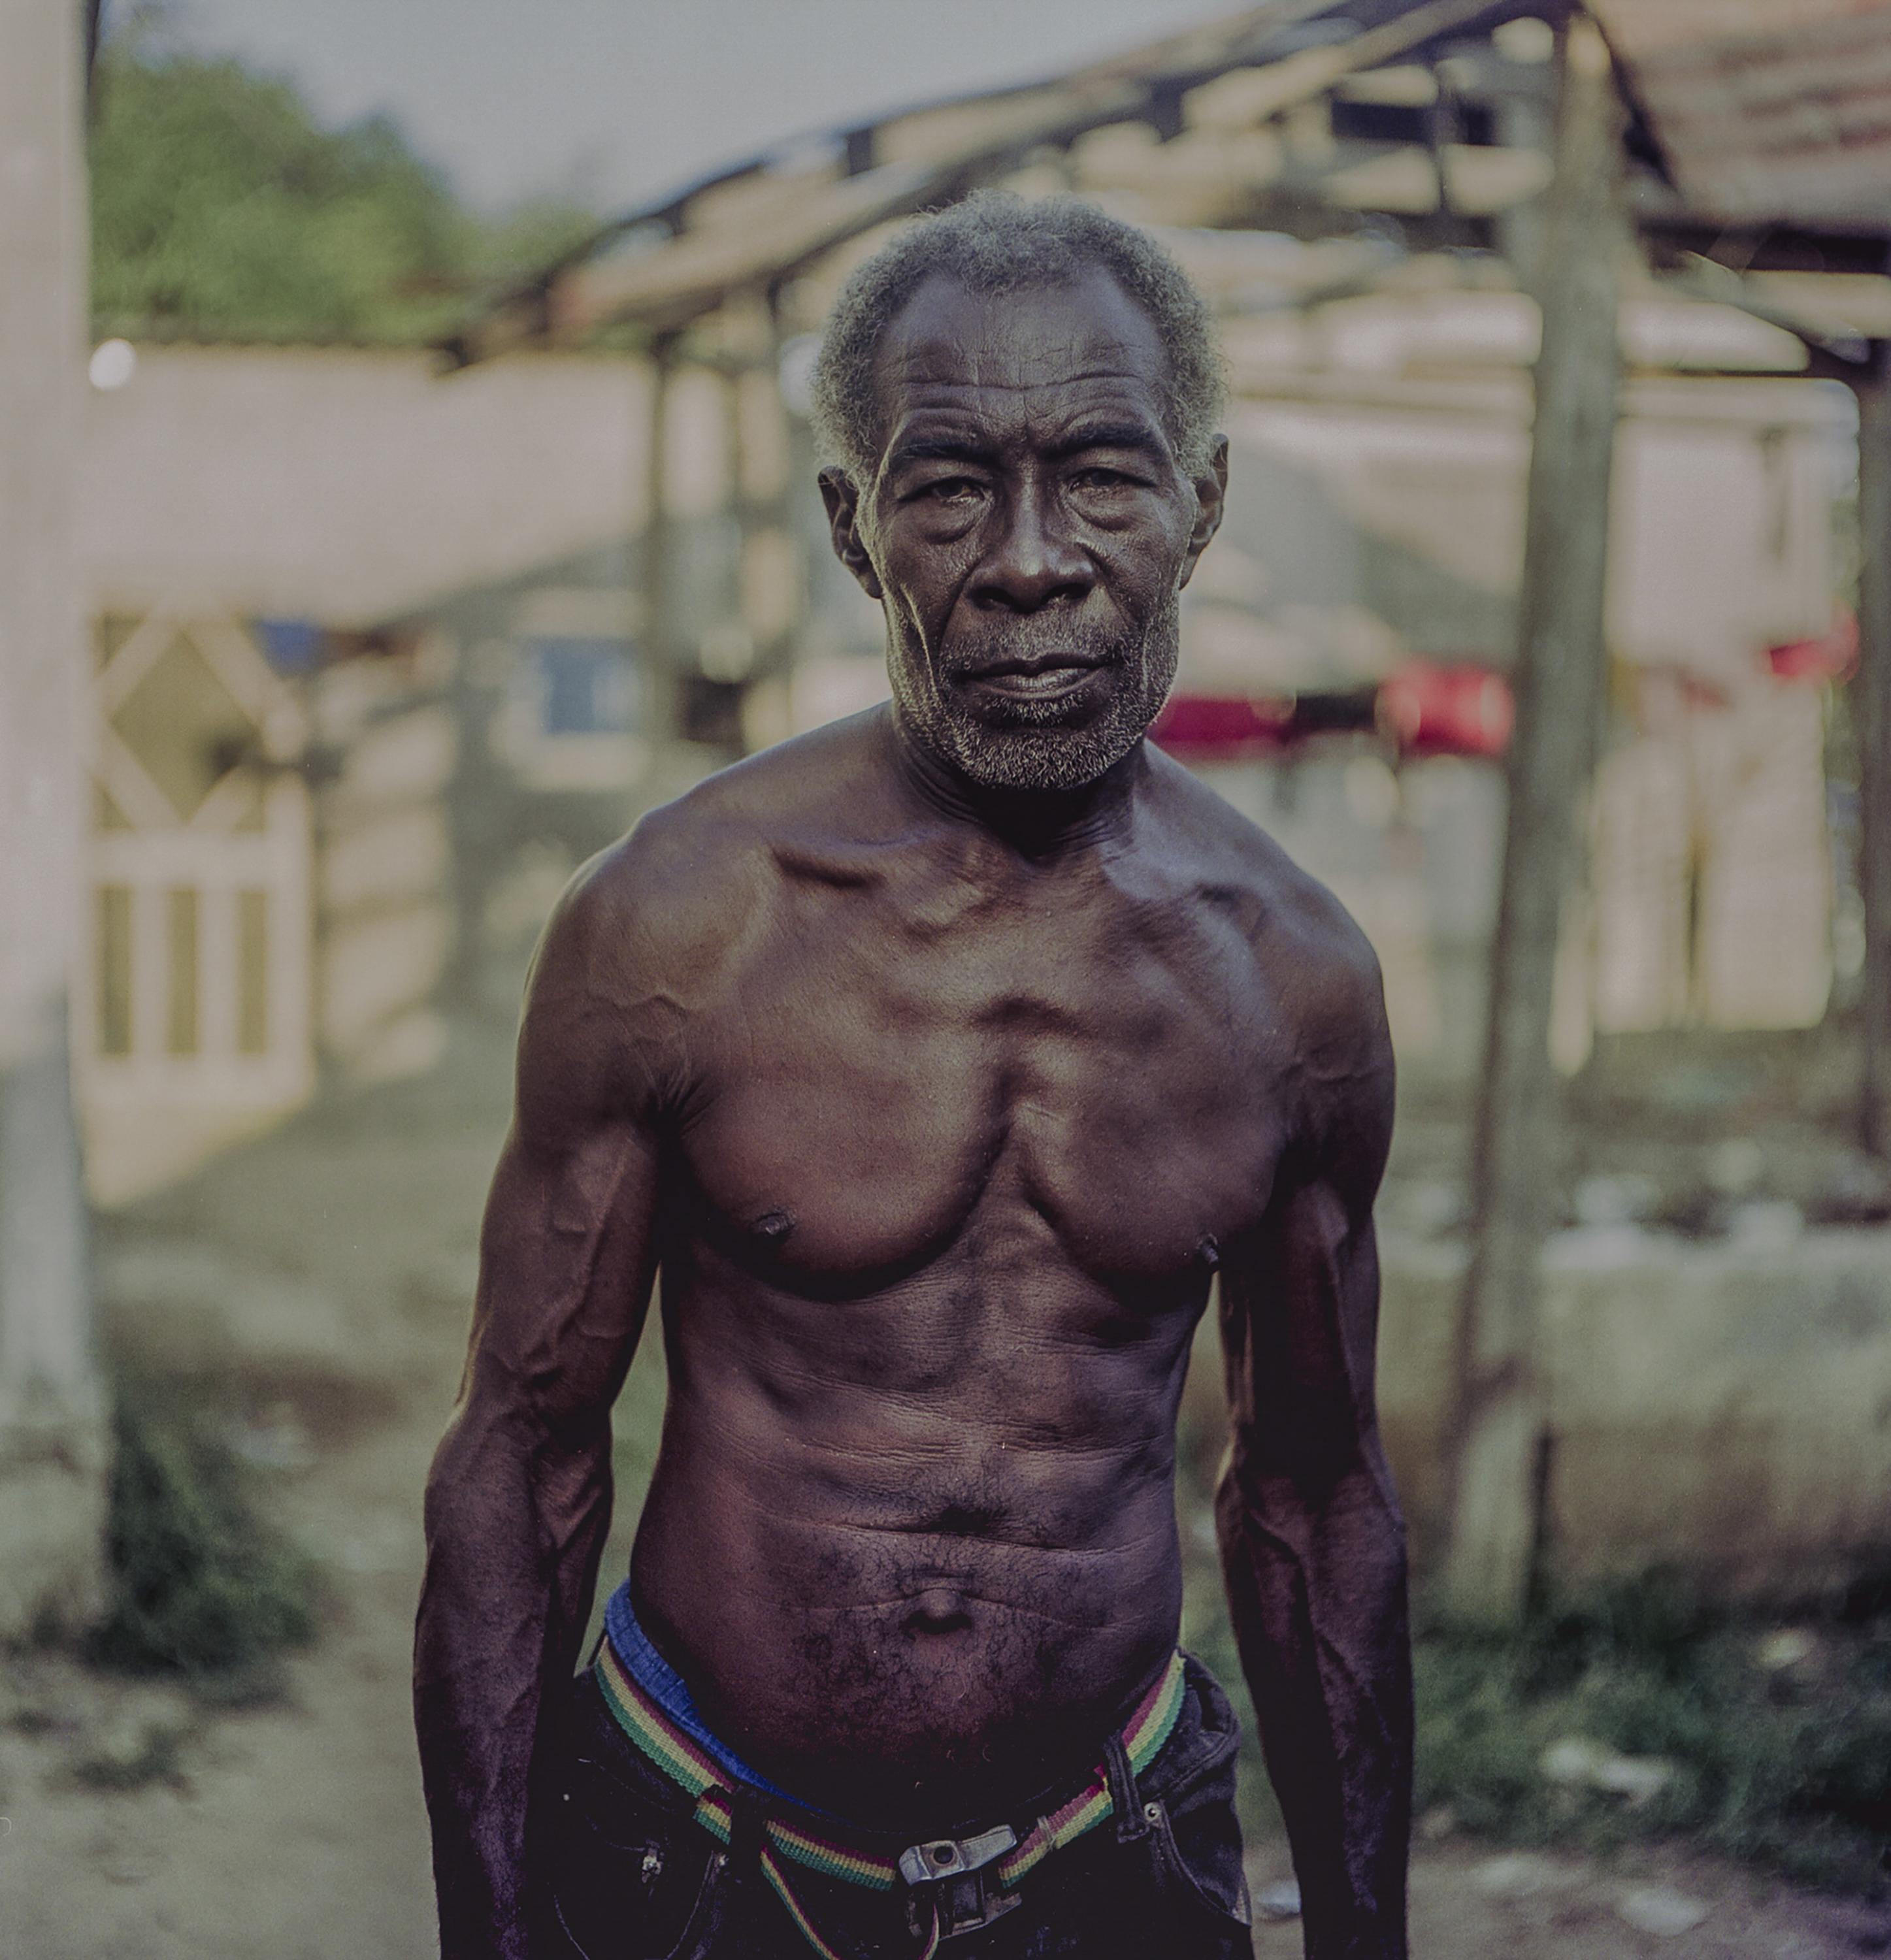 Like most Garifuna men, Jesús Flores, 63, has spent his whole life fishing and diving for lobsters. Twenty-one years ago, on January 27, 2001, as he was fishing near the Cayos Cochinos, a boat of three soldiers drew near. Without asking questions, they shot him in the arm. “I still remember the sound of the bullet striking the wood of my canoe. Then I felt heat and saw blood spilling out,” he says, his eyes glossing over. His fingers never worked again, and those responsible for the attack were never arrested.